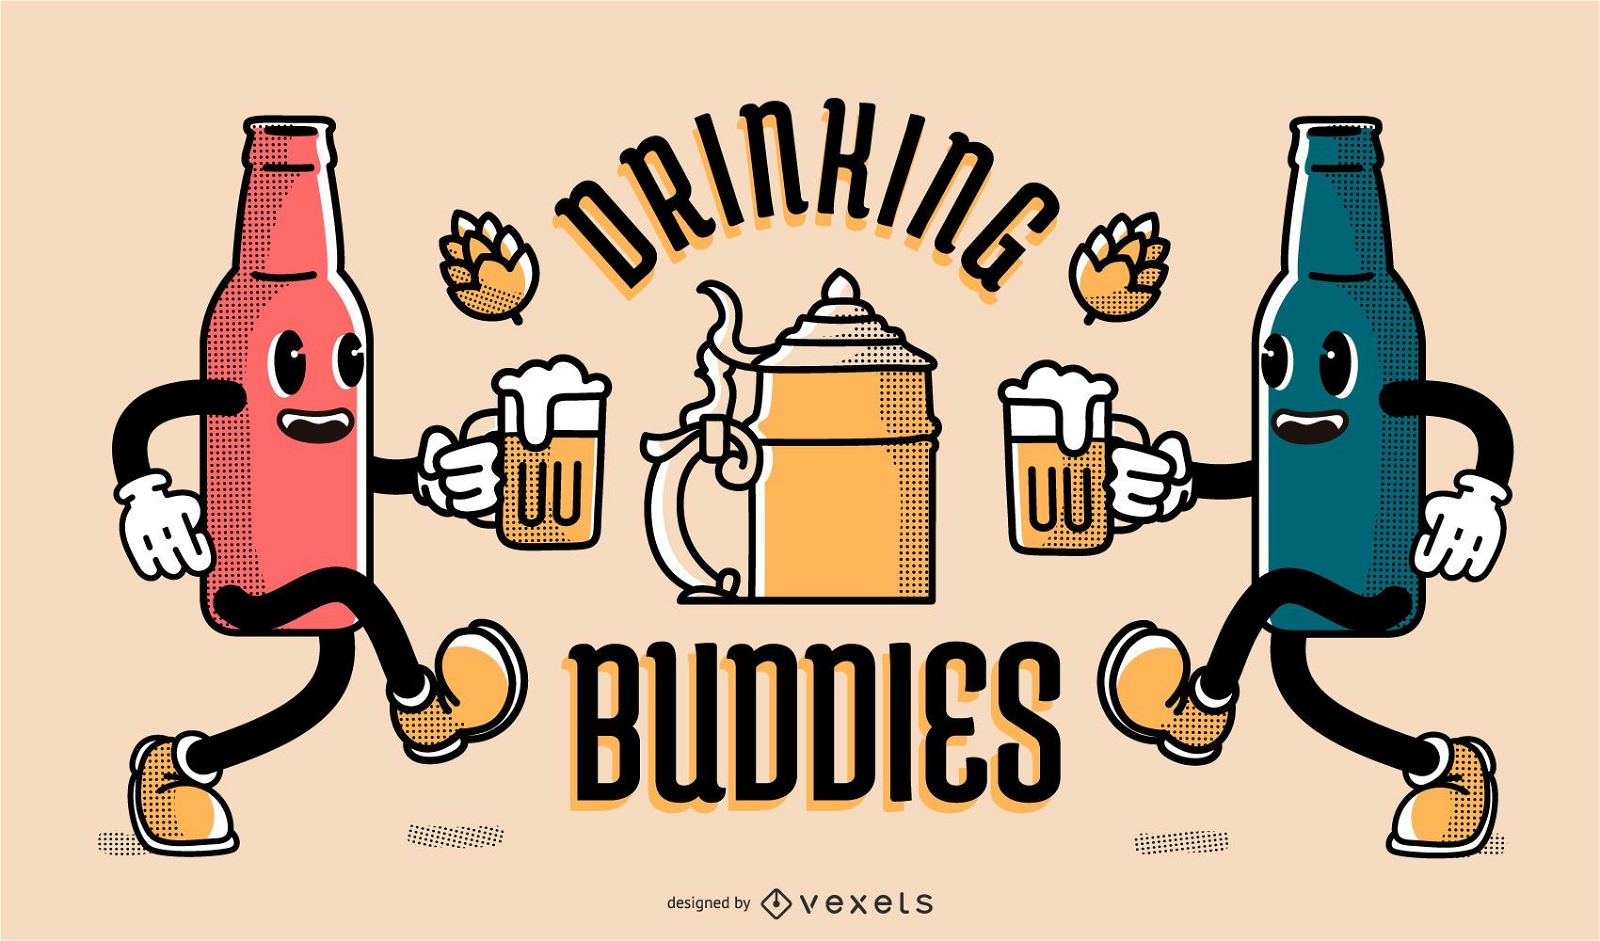 https://images.vexels.com/content/171546/preview/oktoberfest-drinking-buddies-banner-07f8bf.png